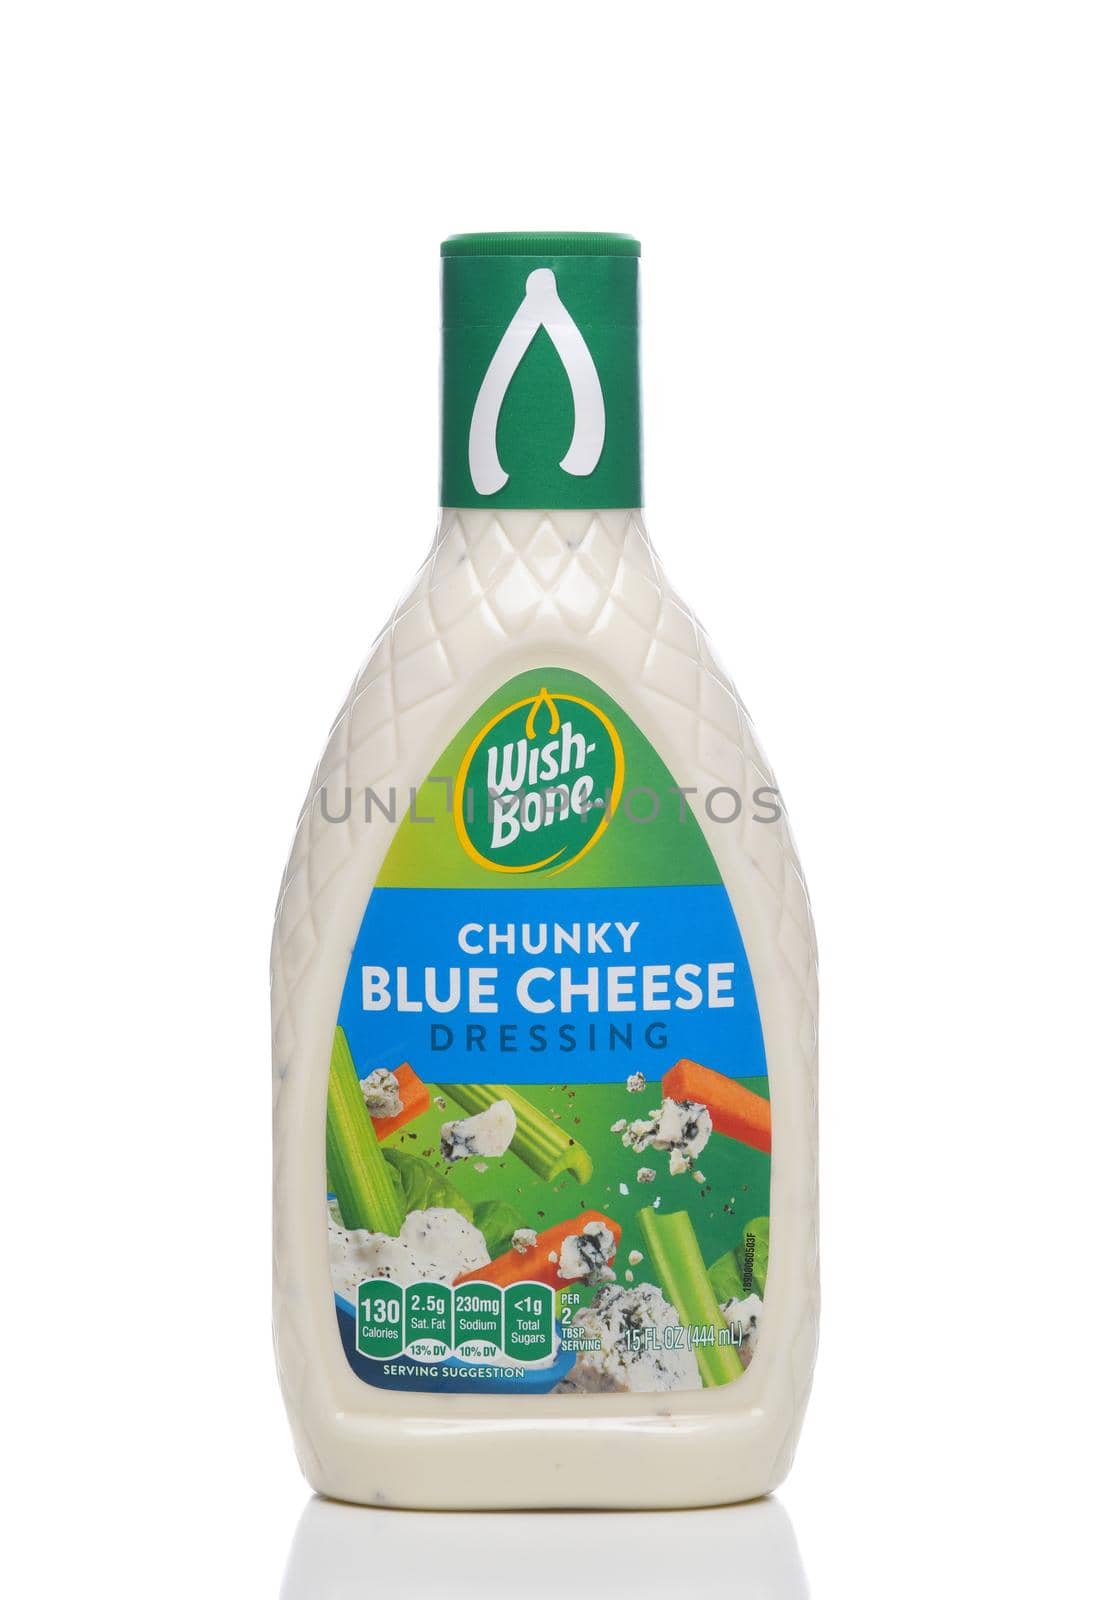 IRVINE, CALIFORNIA - 16 MAY 2020: A bottle of Wishbone Chunky Blue Cheese Dressing. by sCukrov